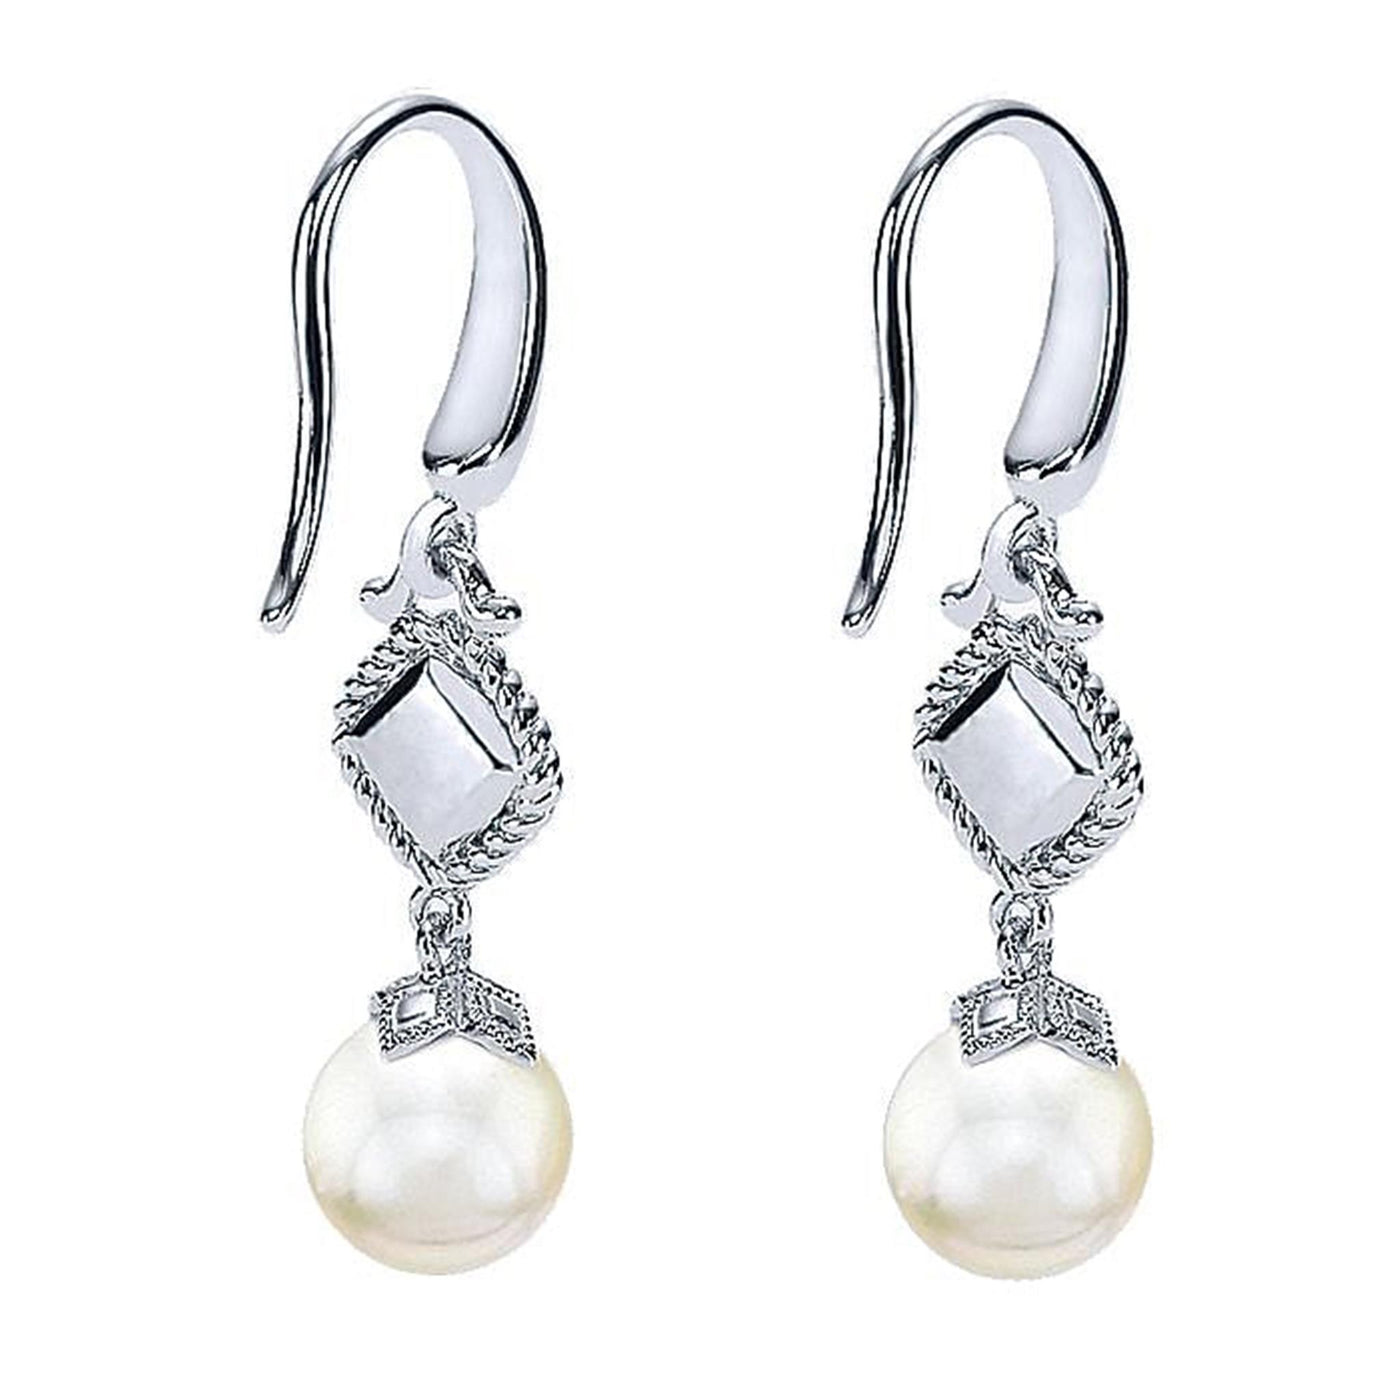 Gabriel Sterling Silver 1.08ctw Drop Style Earrings Featuring Cultured Pearls